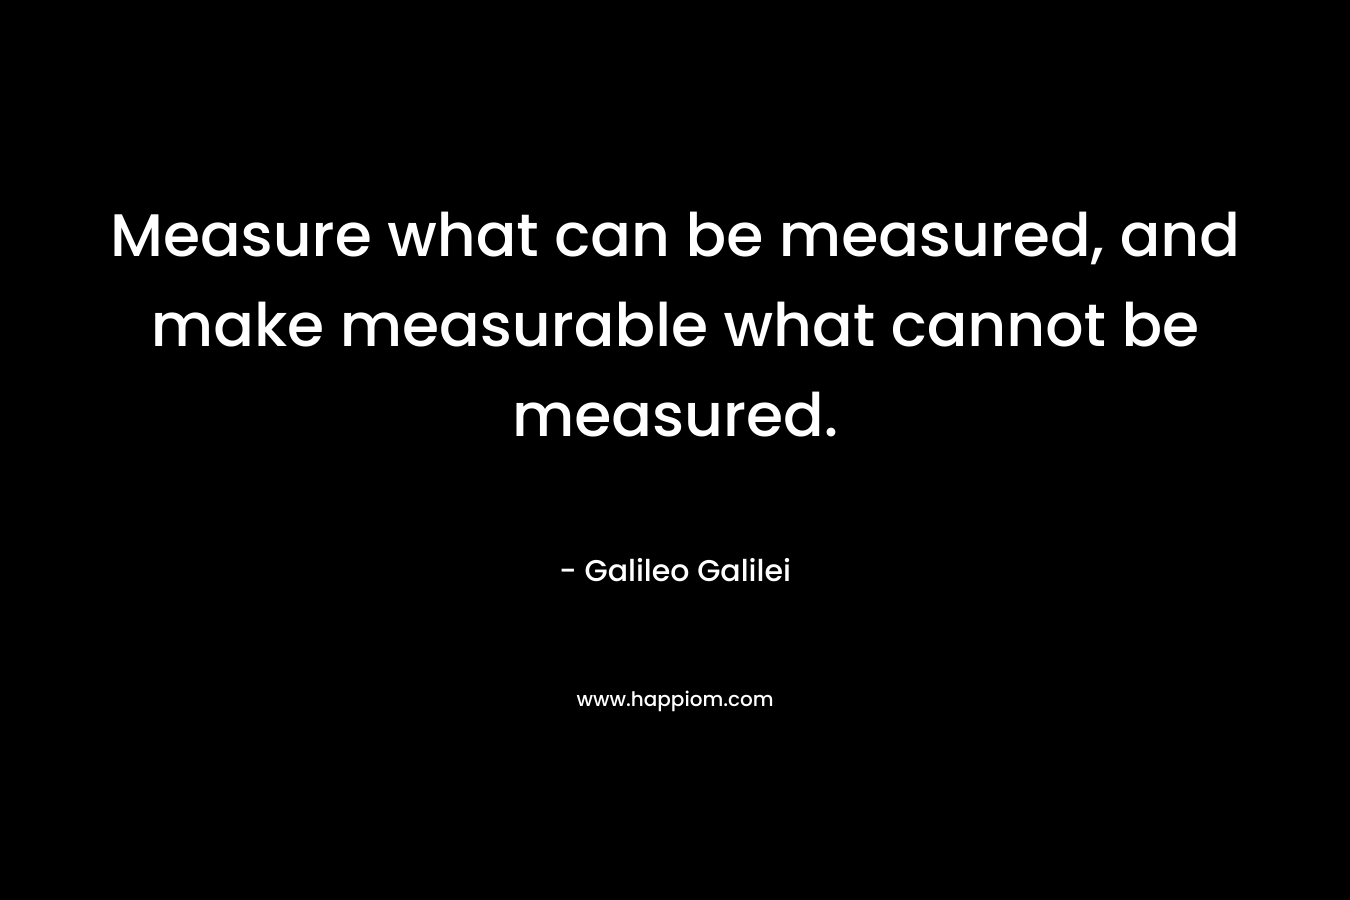 Measure what can be measured, and make measurable what cannot be measured.